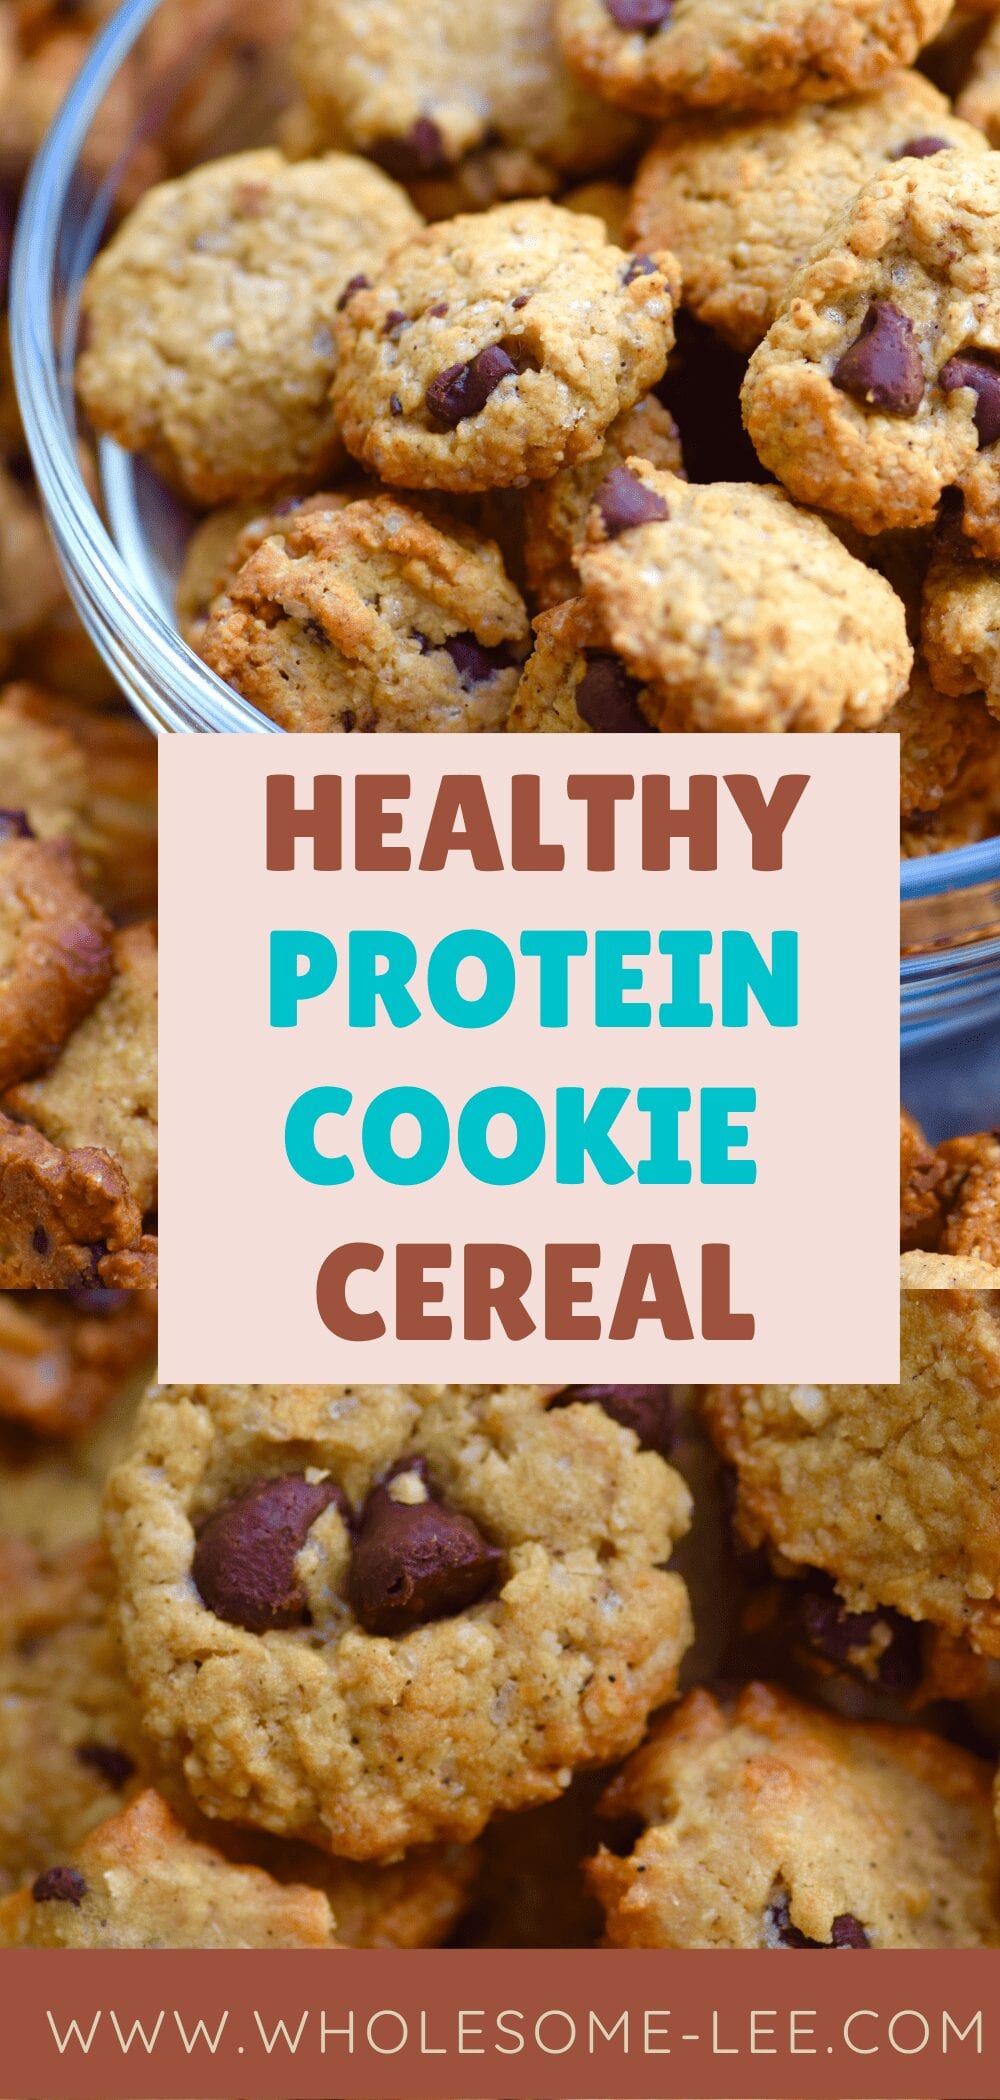 Healthy Protein Cookie Cereal